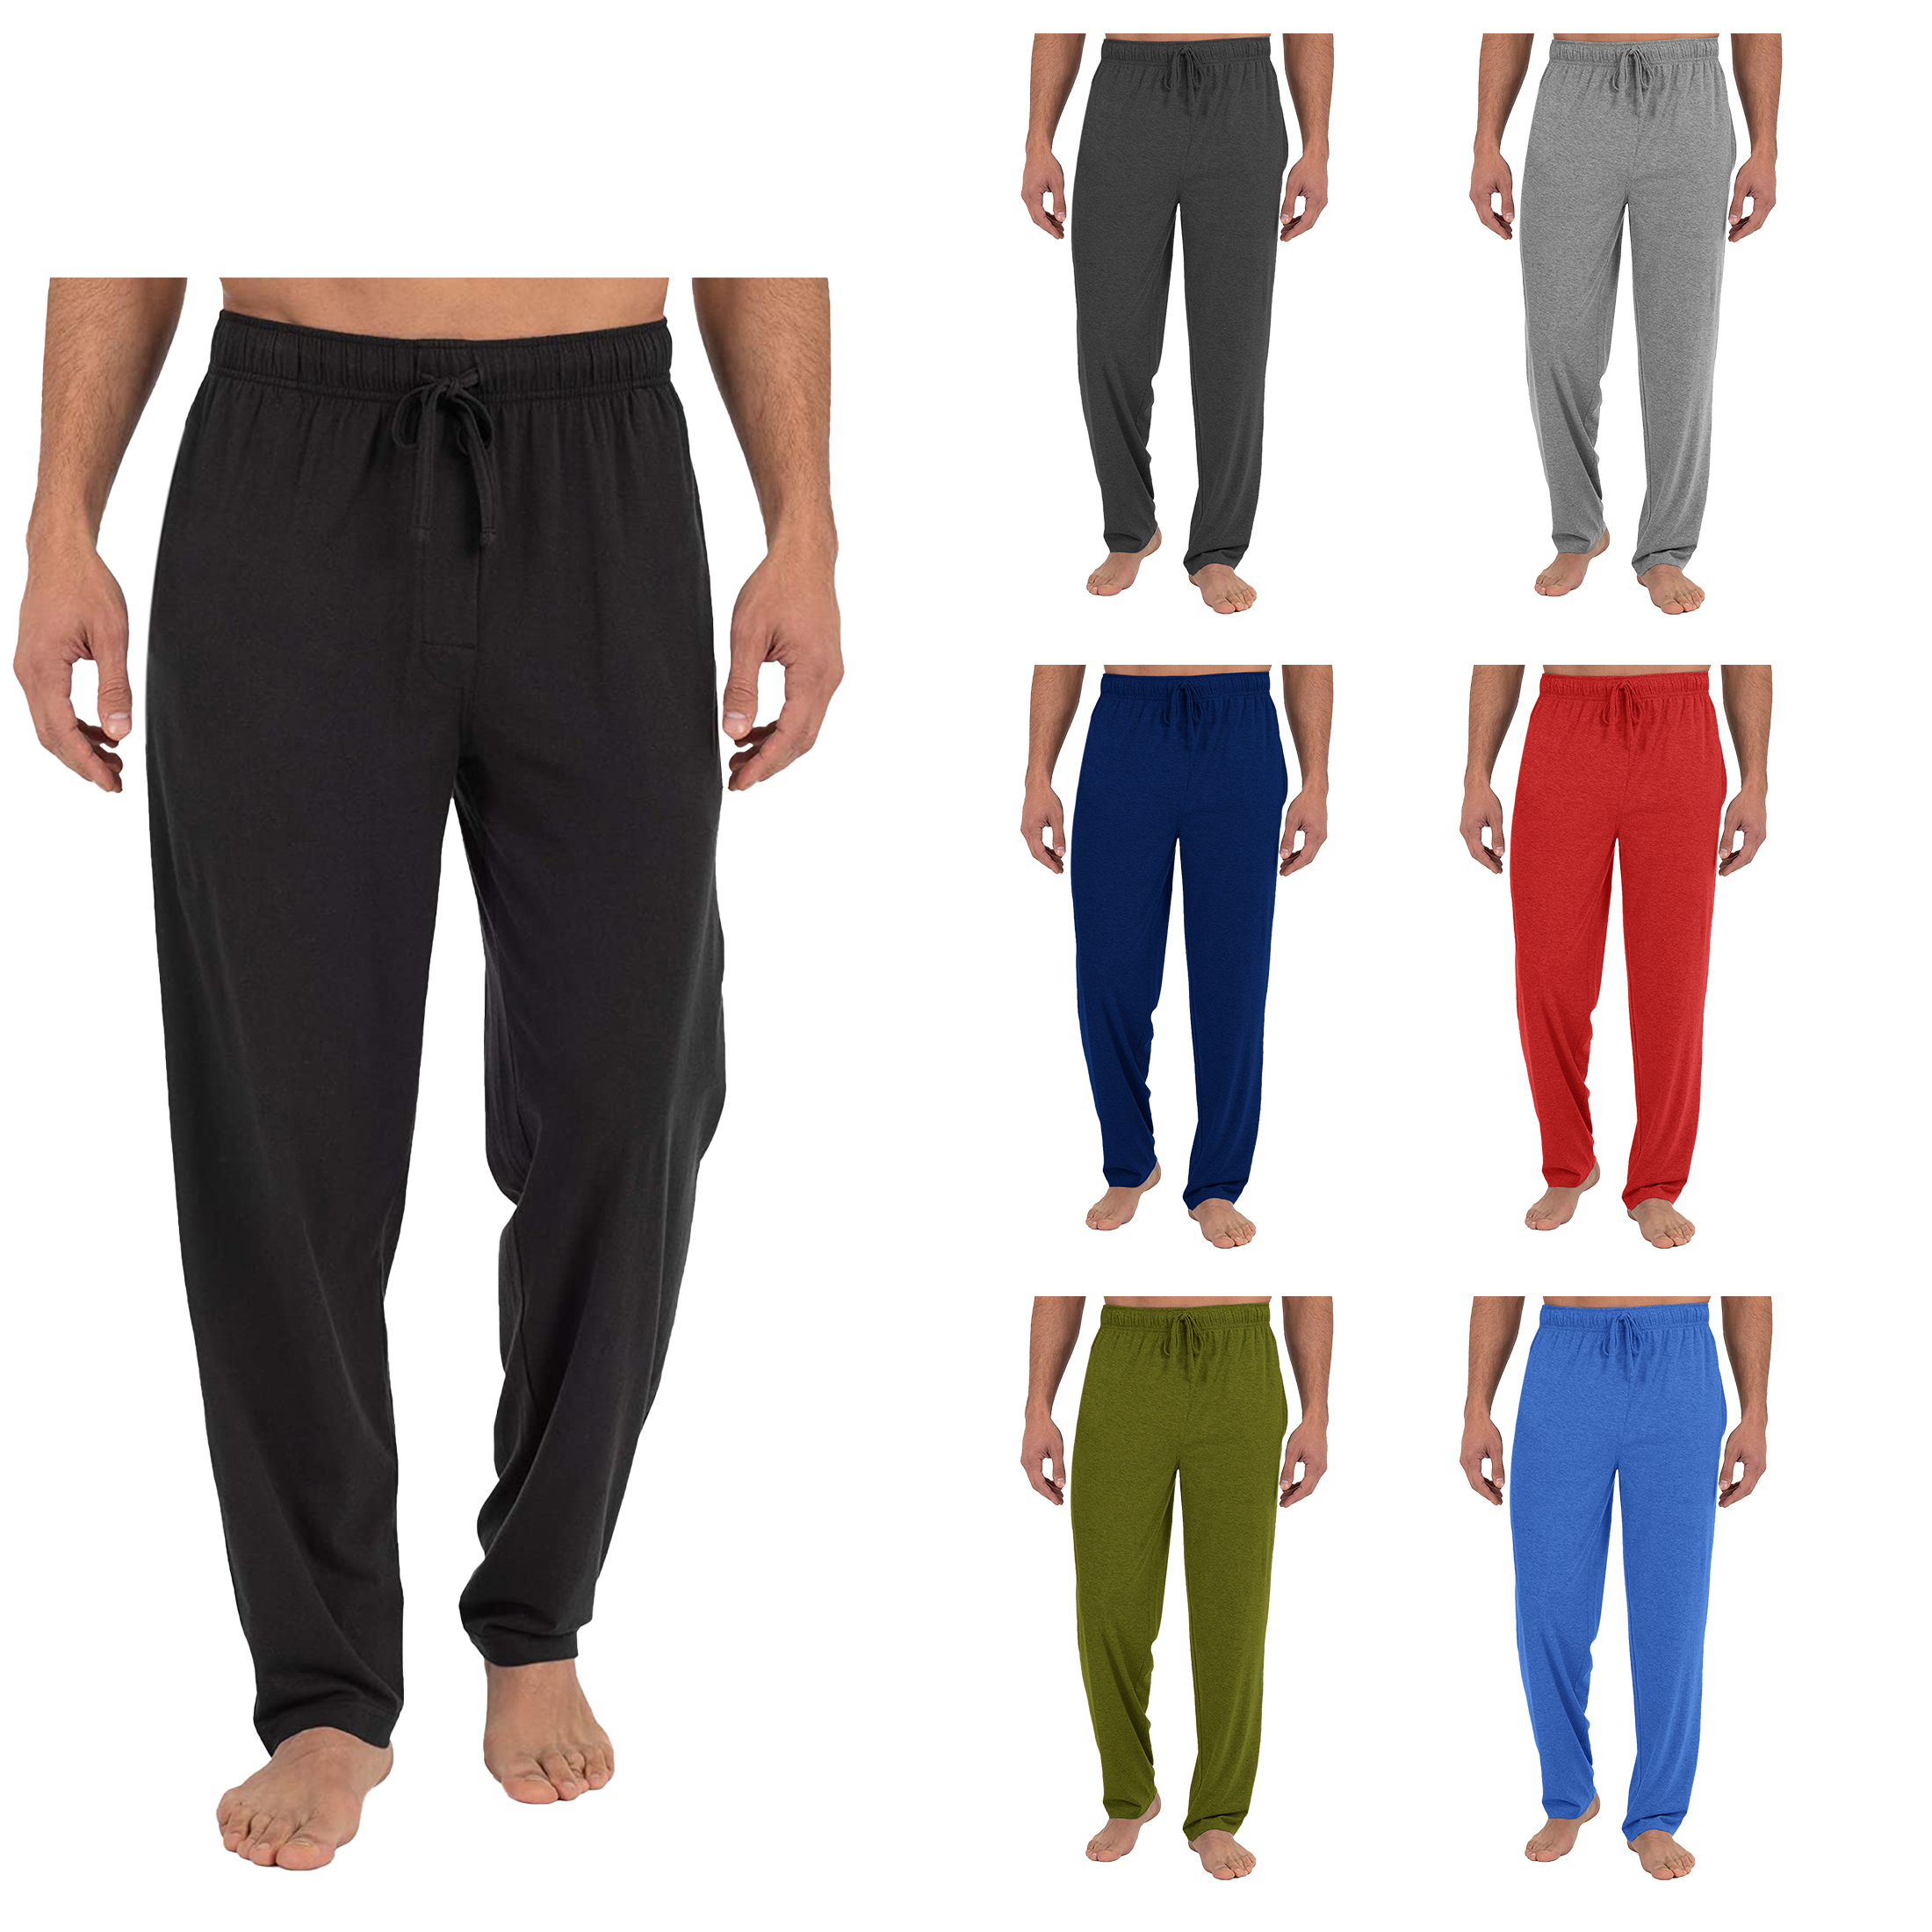 3-Pack Men's Solid Sleep Pajama Pants With Drawstring Jersey Knit Soft Straight-Fit Lounge Trousers - S